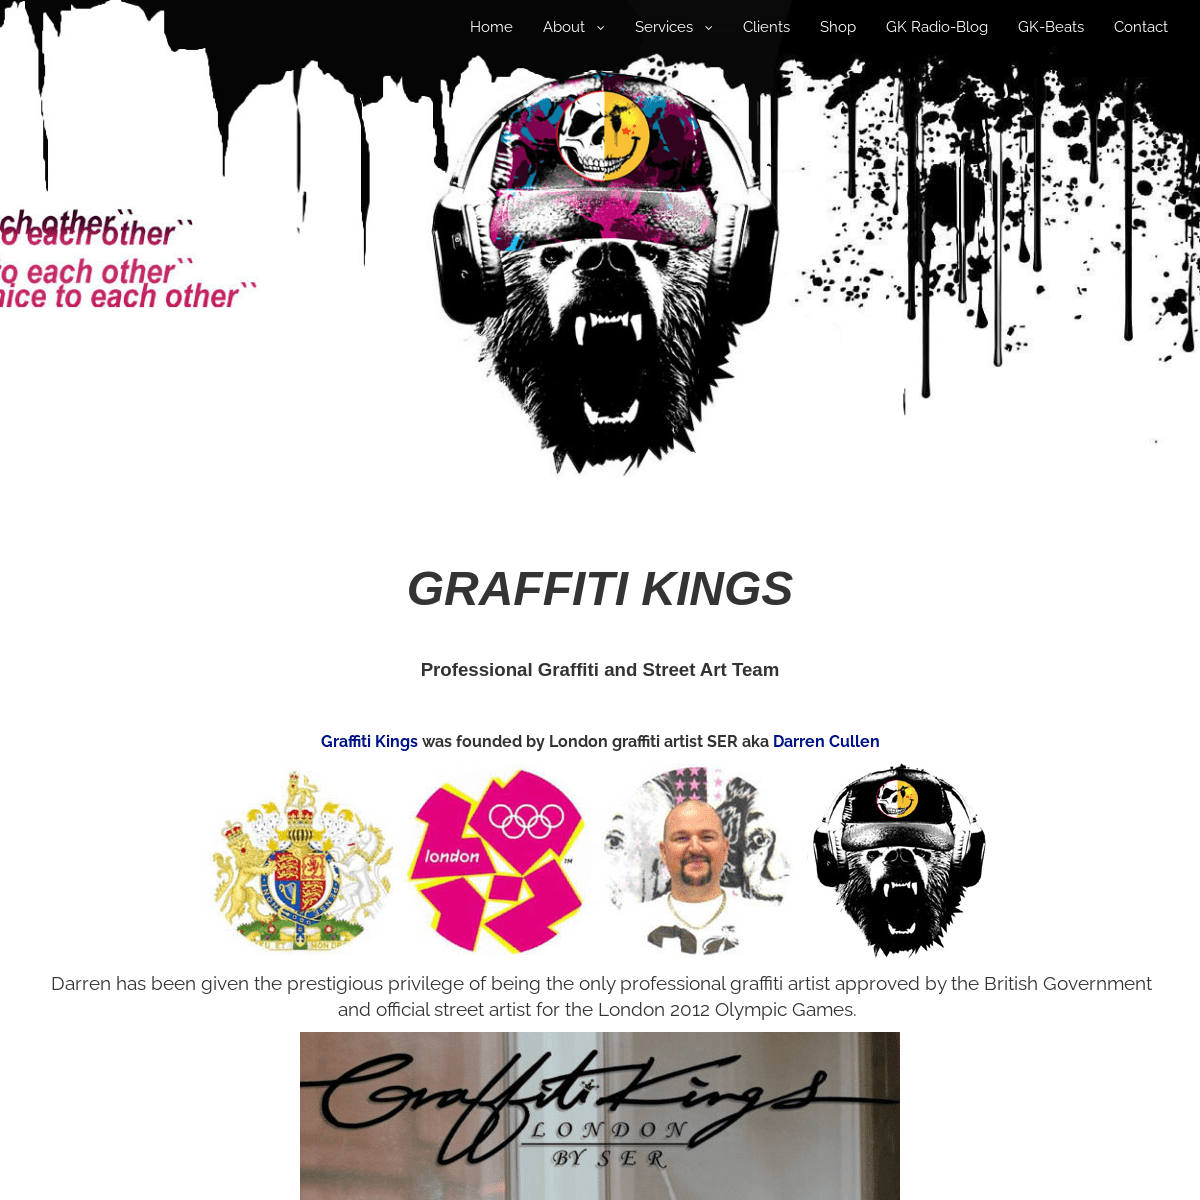 A complete backup of https://graffitikings.co.uk